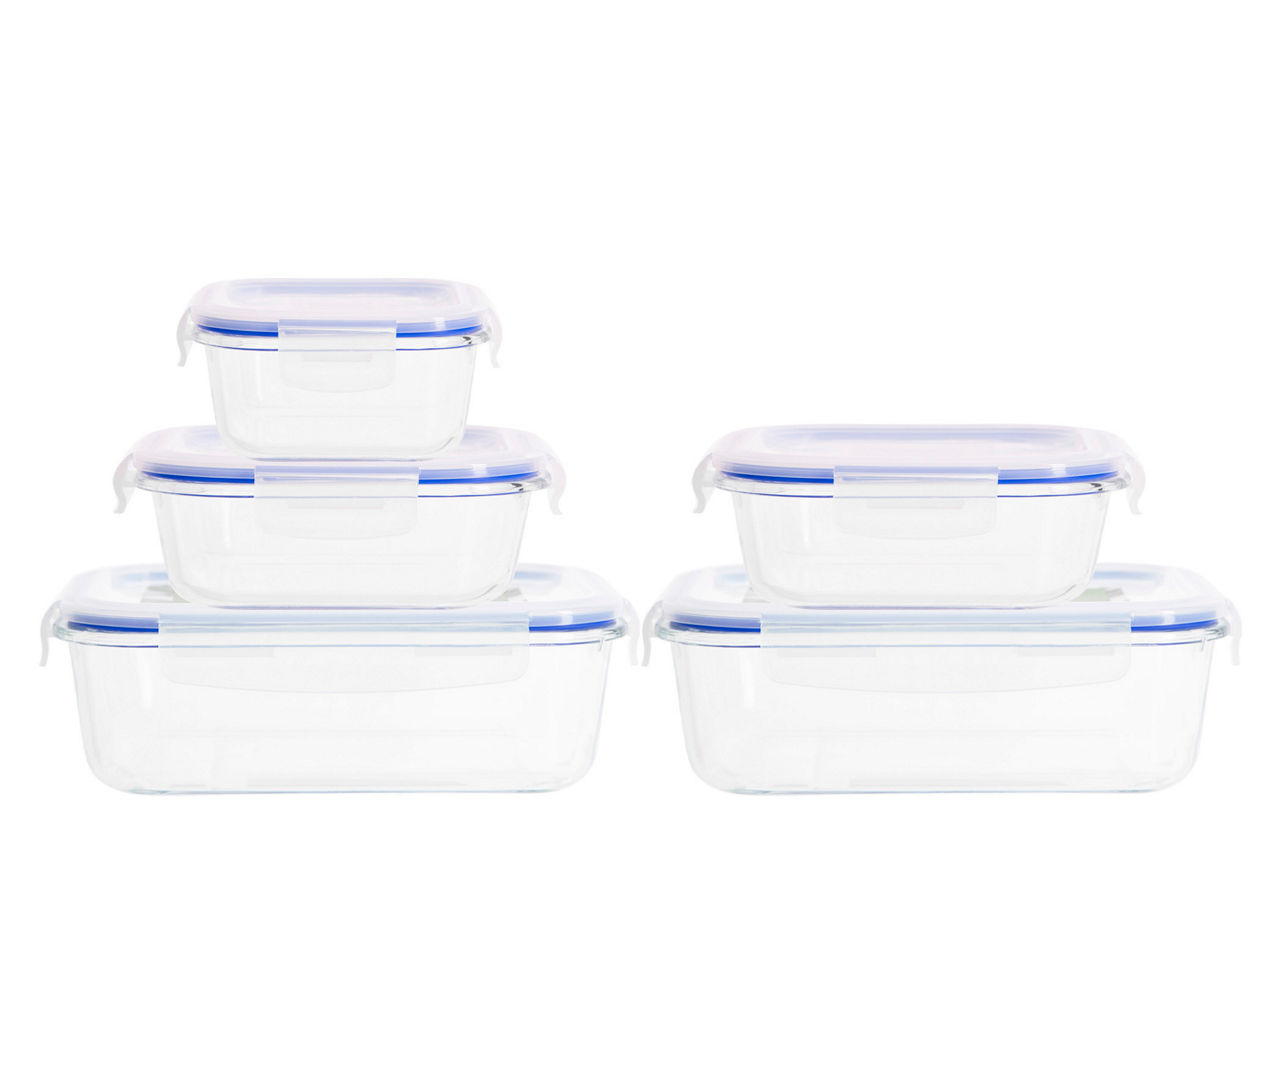 Home Essentials Fresh & Seal Glass Food Storage Container Set - Each